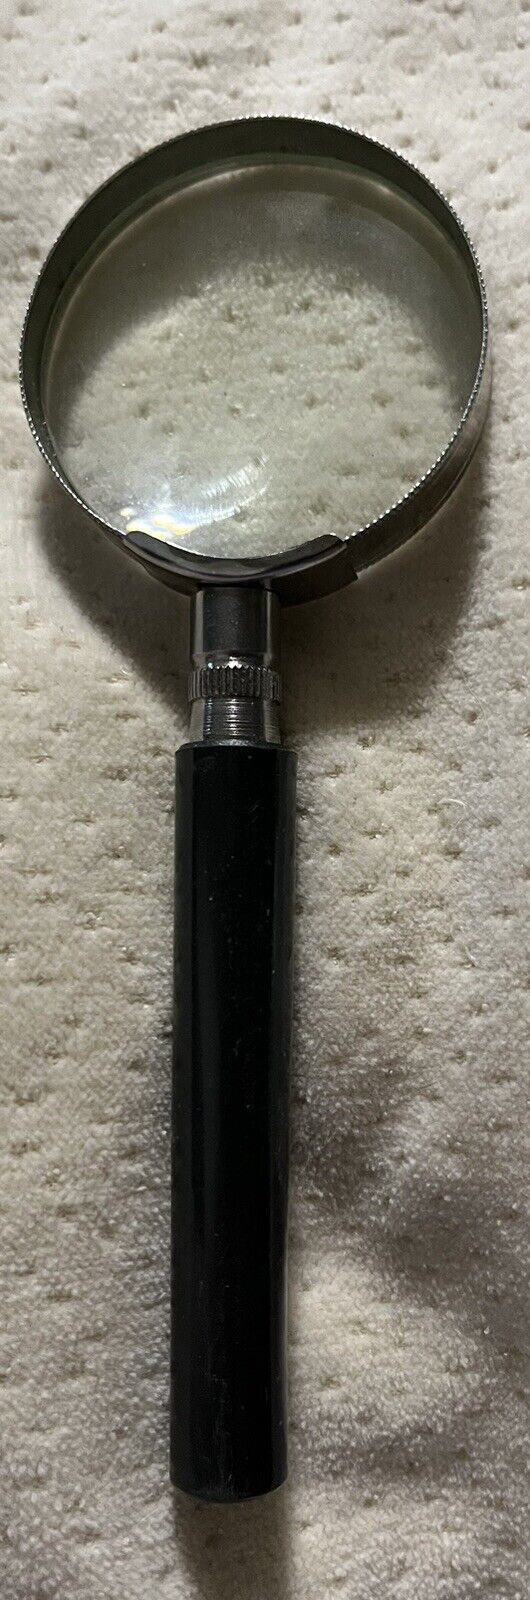 Vintage Magnifier Magnifying Glass. Excellent Condition